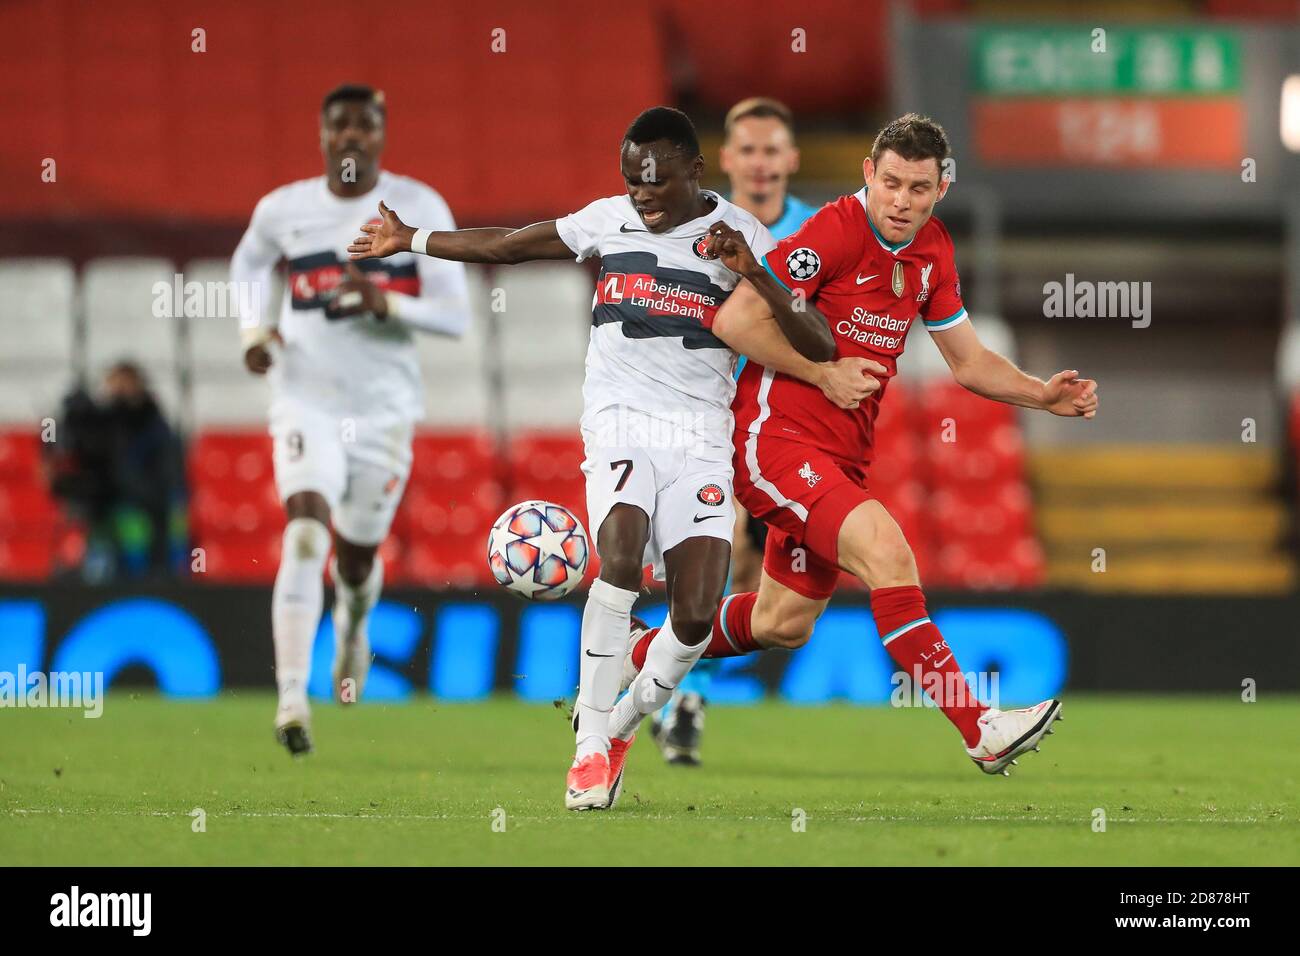 James Milner (7) of Liverpool fouls Pione Sisto (7) of FC Midtjylland Credit: News Images /Alamy Live News Stock Photo